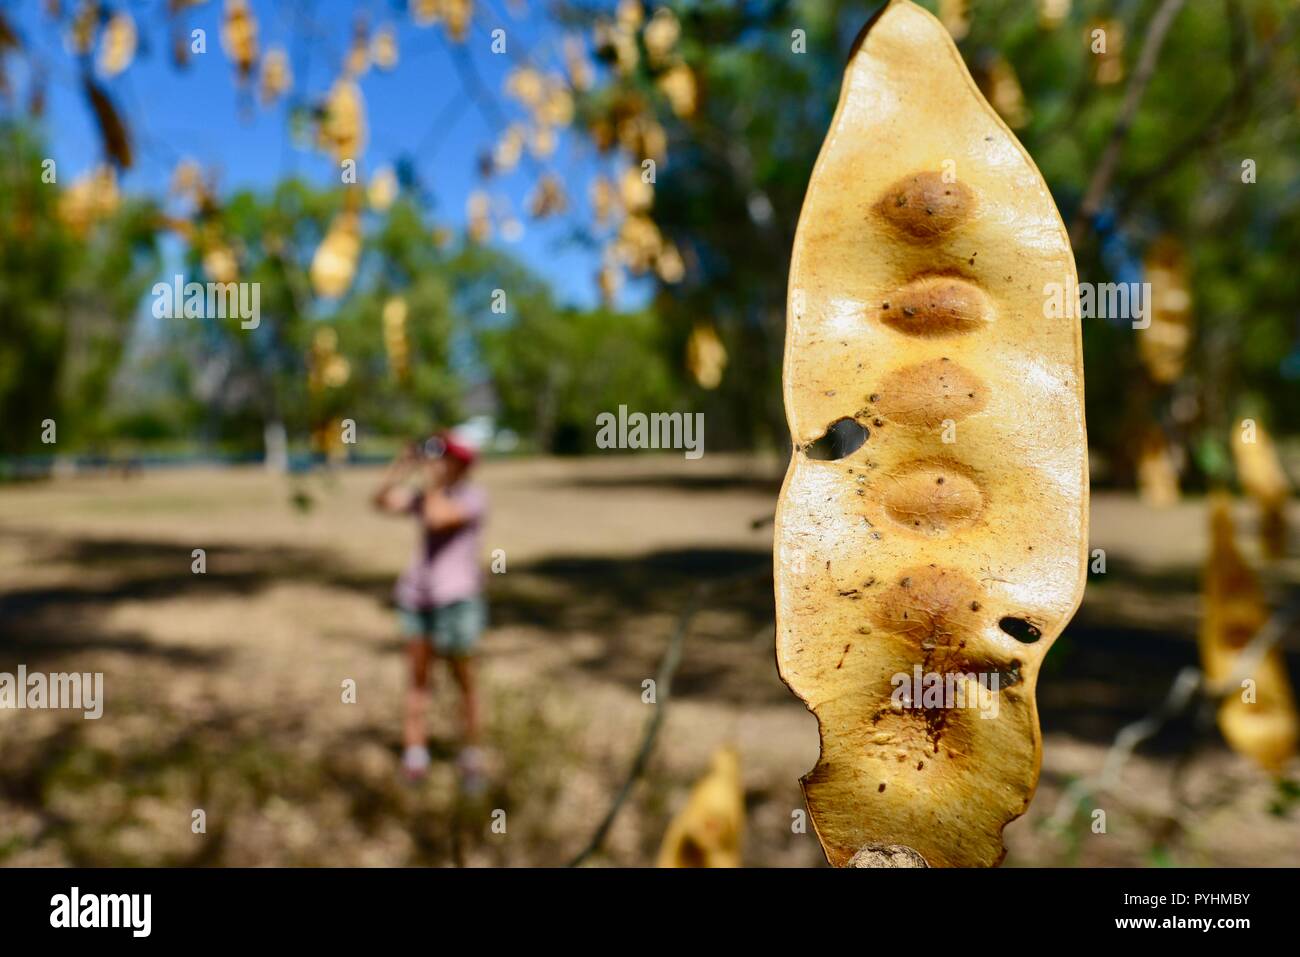 The dried yellow seed pods of Indian siris Albizia lebbeck,Ross river area, Townsville, QLD, Australia Stock Photo